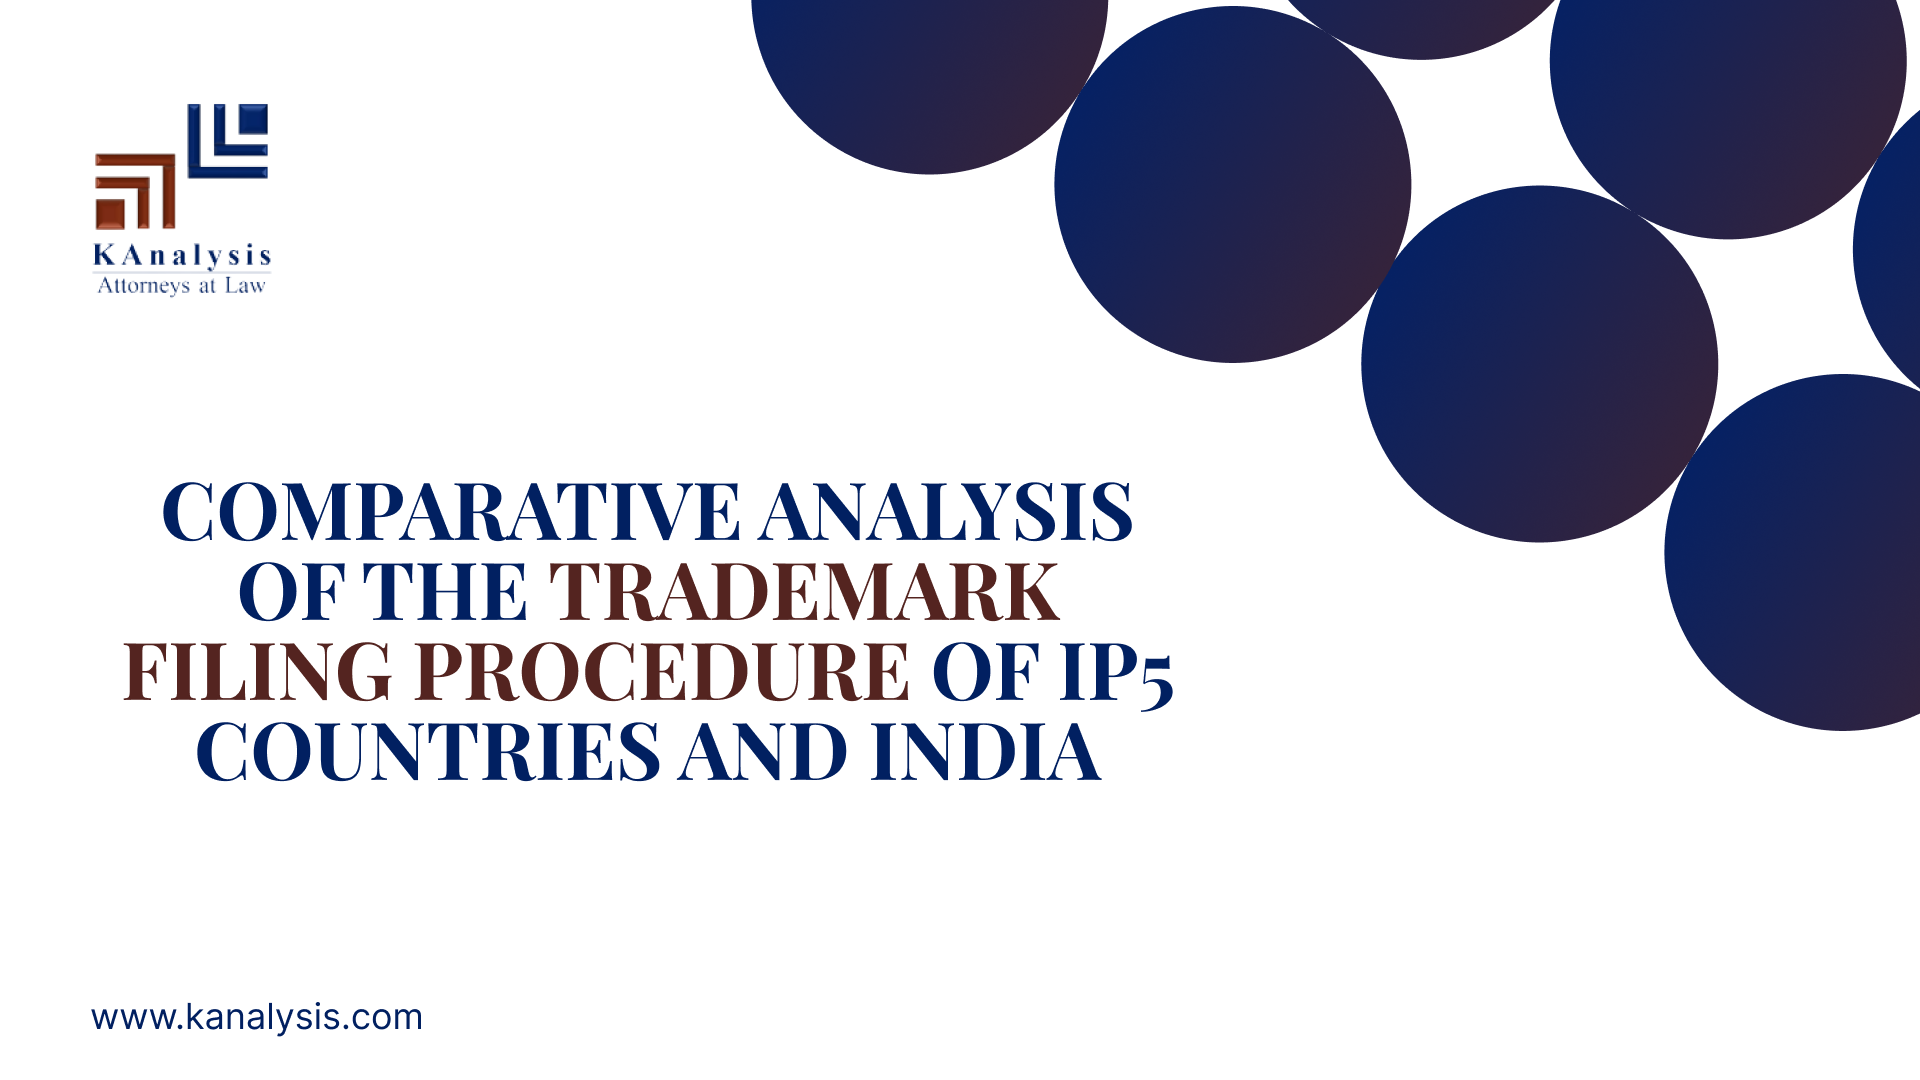 Read more about the article COMPARATIVE ANALYSIS OF THE TRADEMARK FILING PROCEDURE OF IP5 COUNTRIES AND INDIA